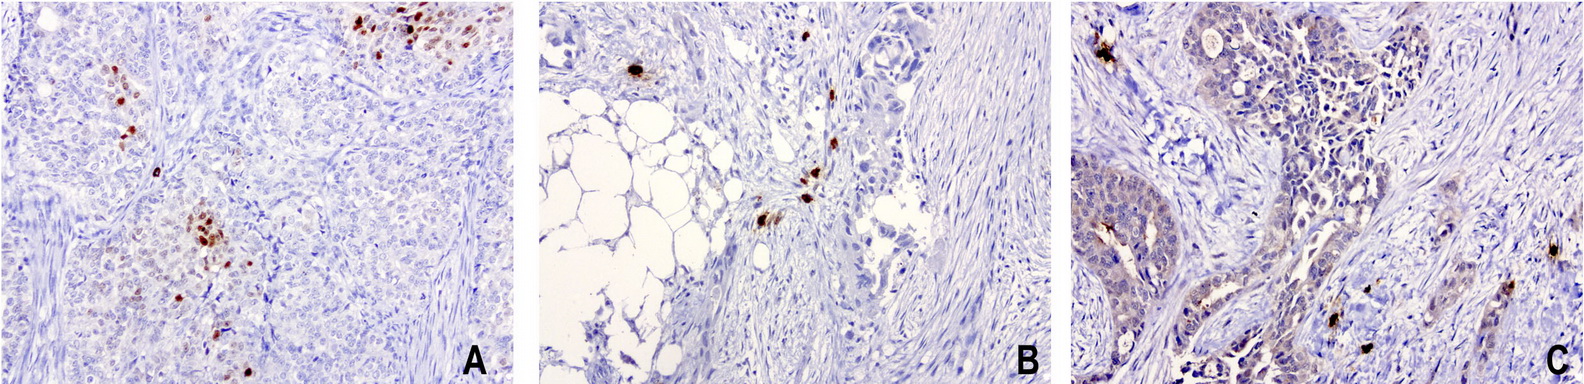 NKX3-1 Antibody - Immunohistochemical staining of 3 cases of paraffin-embedded human endometrial carcinoma using anti-NKX3.1 clone UMAB195 mouse monoclonal antibody  at 1:100 with Polink2 Broad HRP DAB detection kit; heat-induced epitope retrieval with GBI ACCEL pH8.7 HIER buffer using pressure chamber for 3 minutes at 110C. No staining seen in the tumor cells but some cytoplasmic staining was visualized in the third case along with weak nuclear staining.